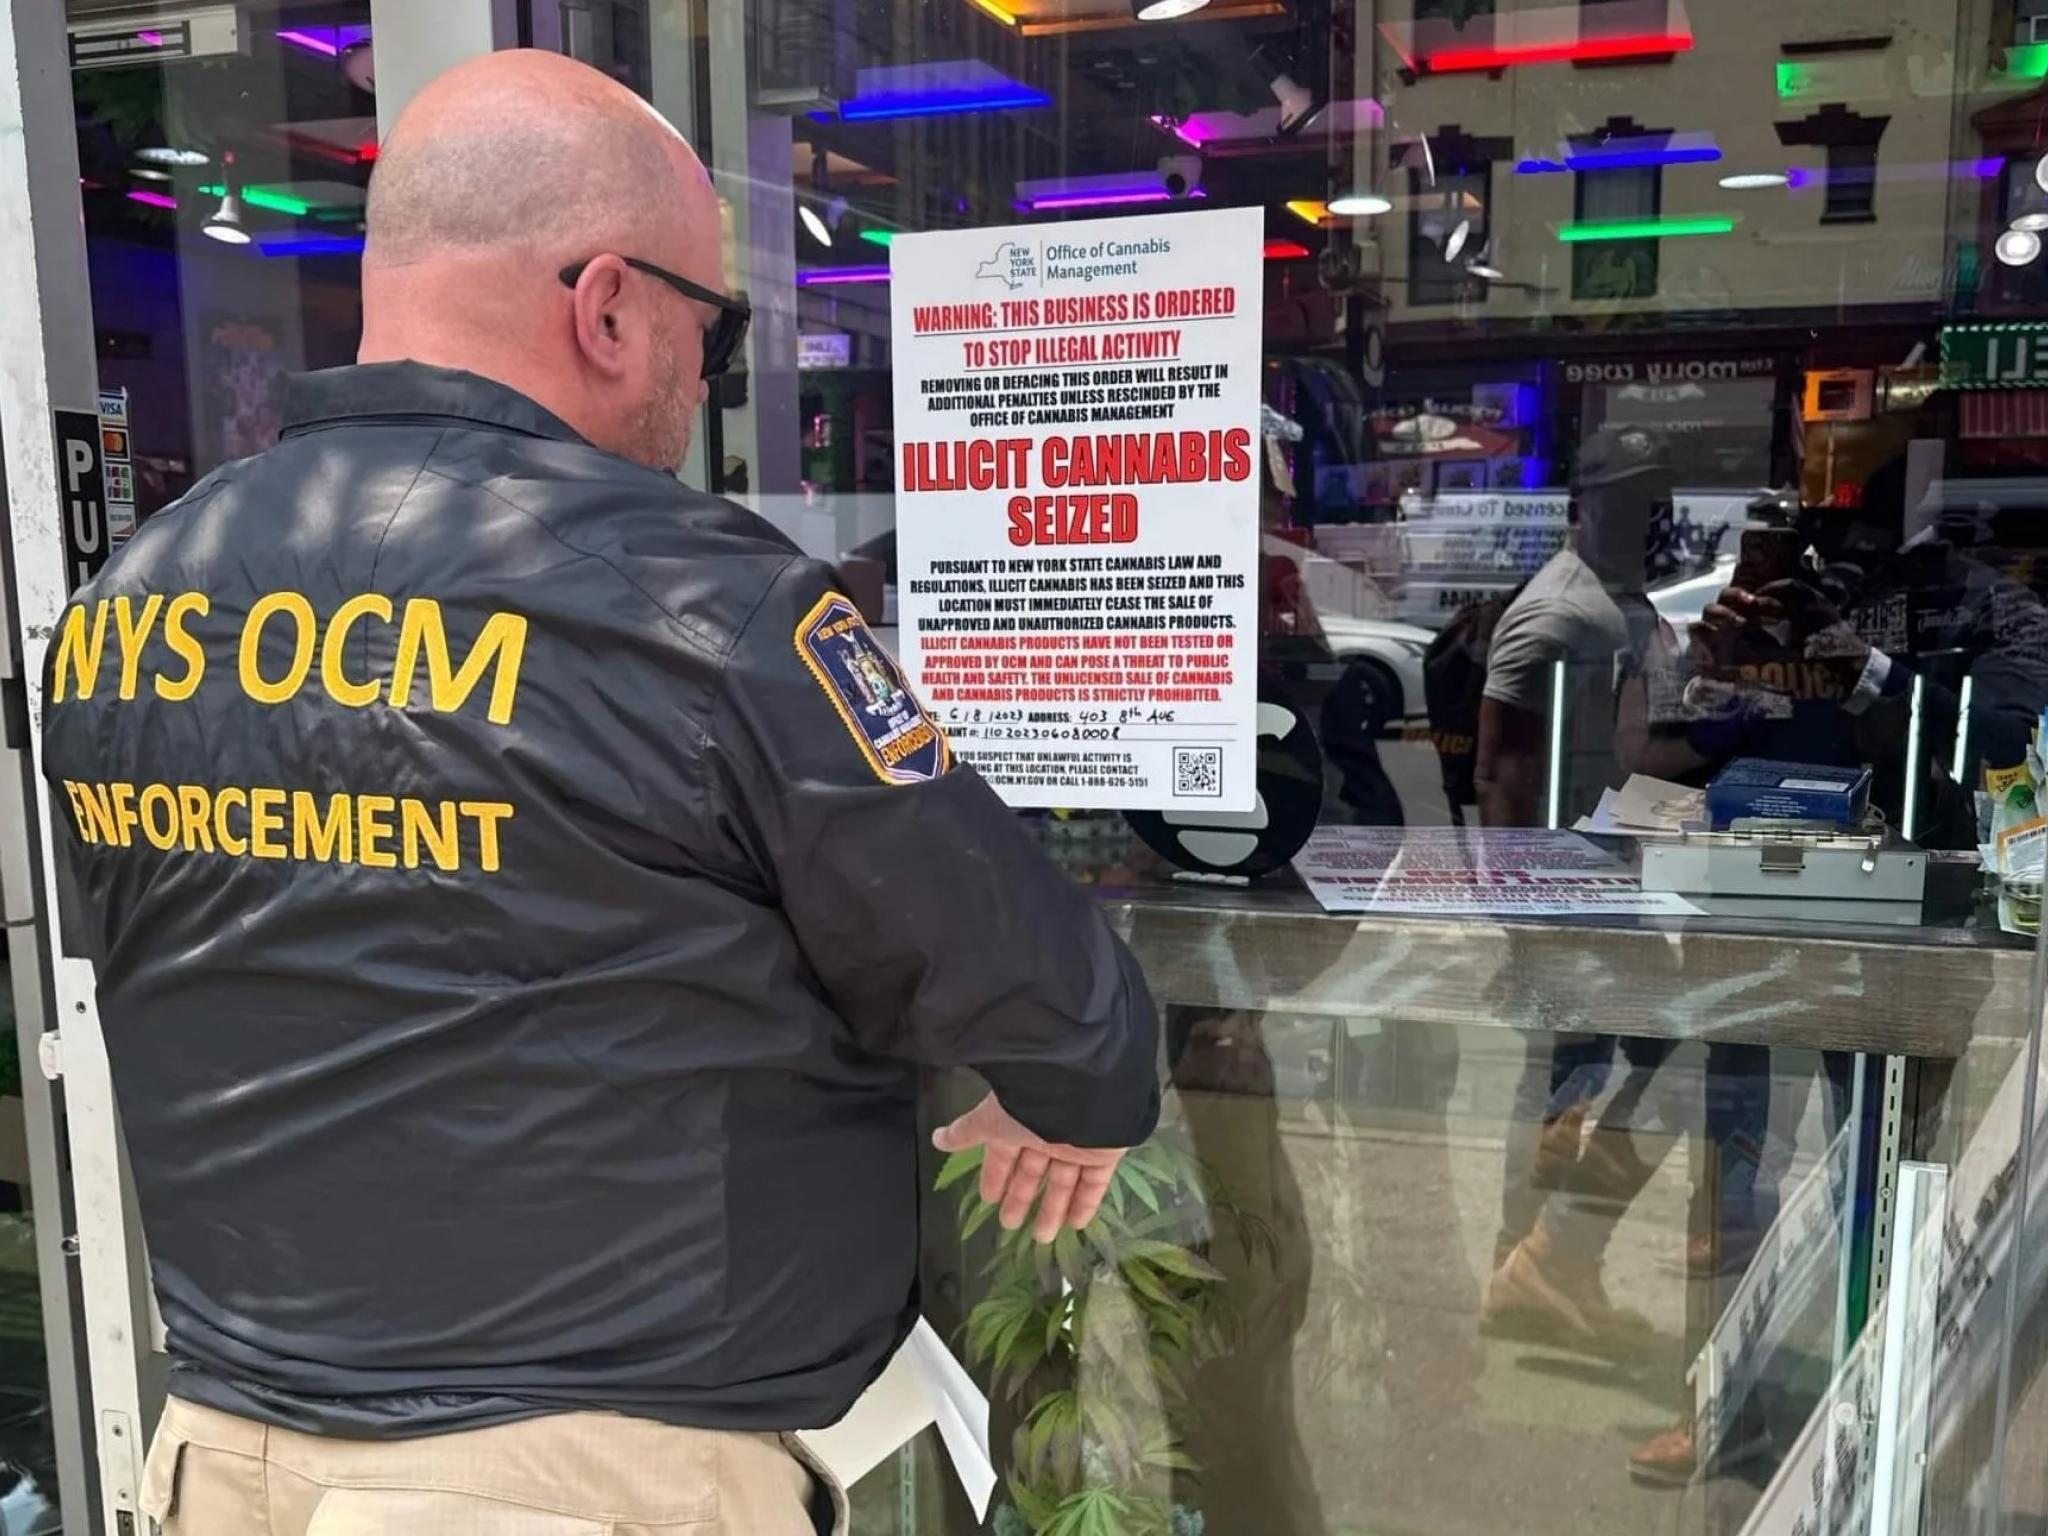  new-york-cannabis-cops-seized-54m-in-illicit-weed-from-unlicensed-storefronts-says-gov-hochul 